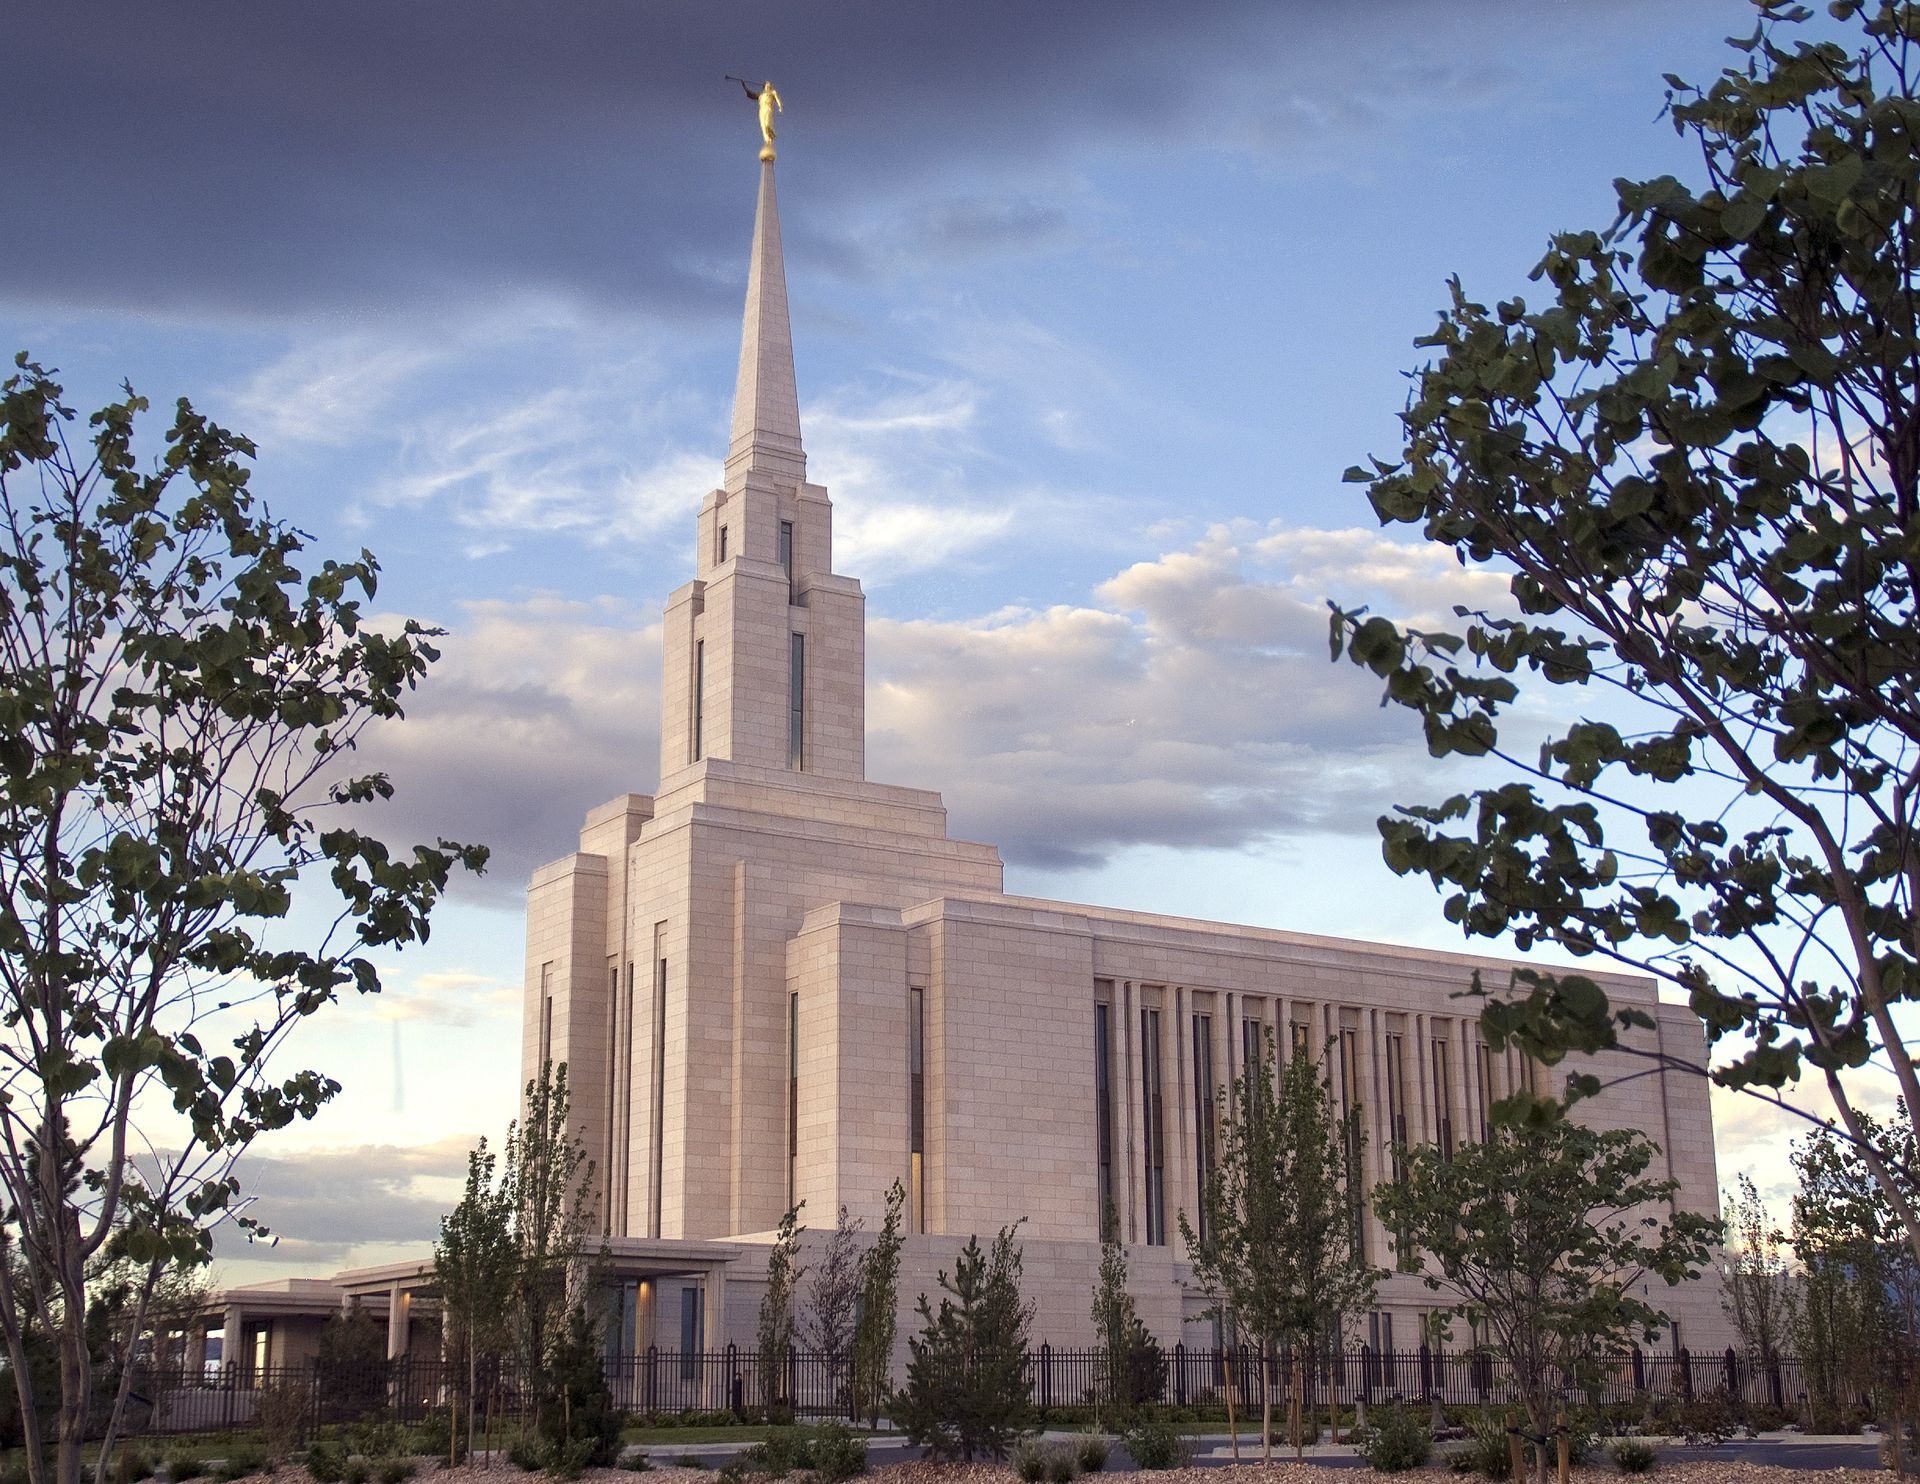 The Oquirrh Mountain Utah Temple side view at sunset, including the entrance and scenery.